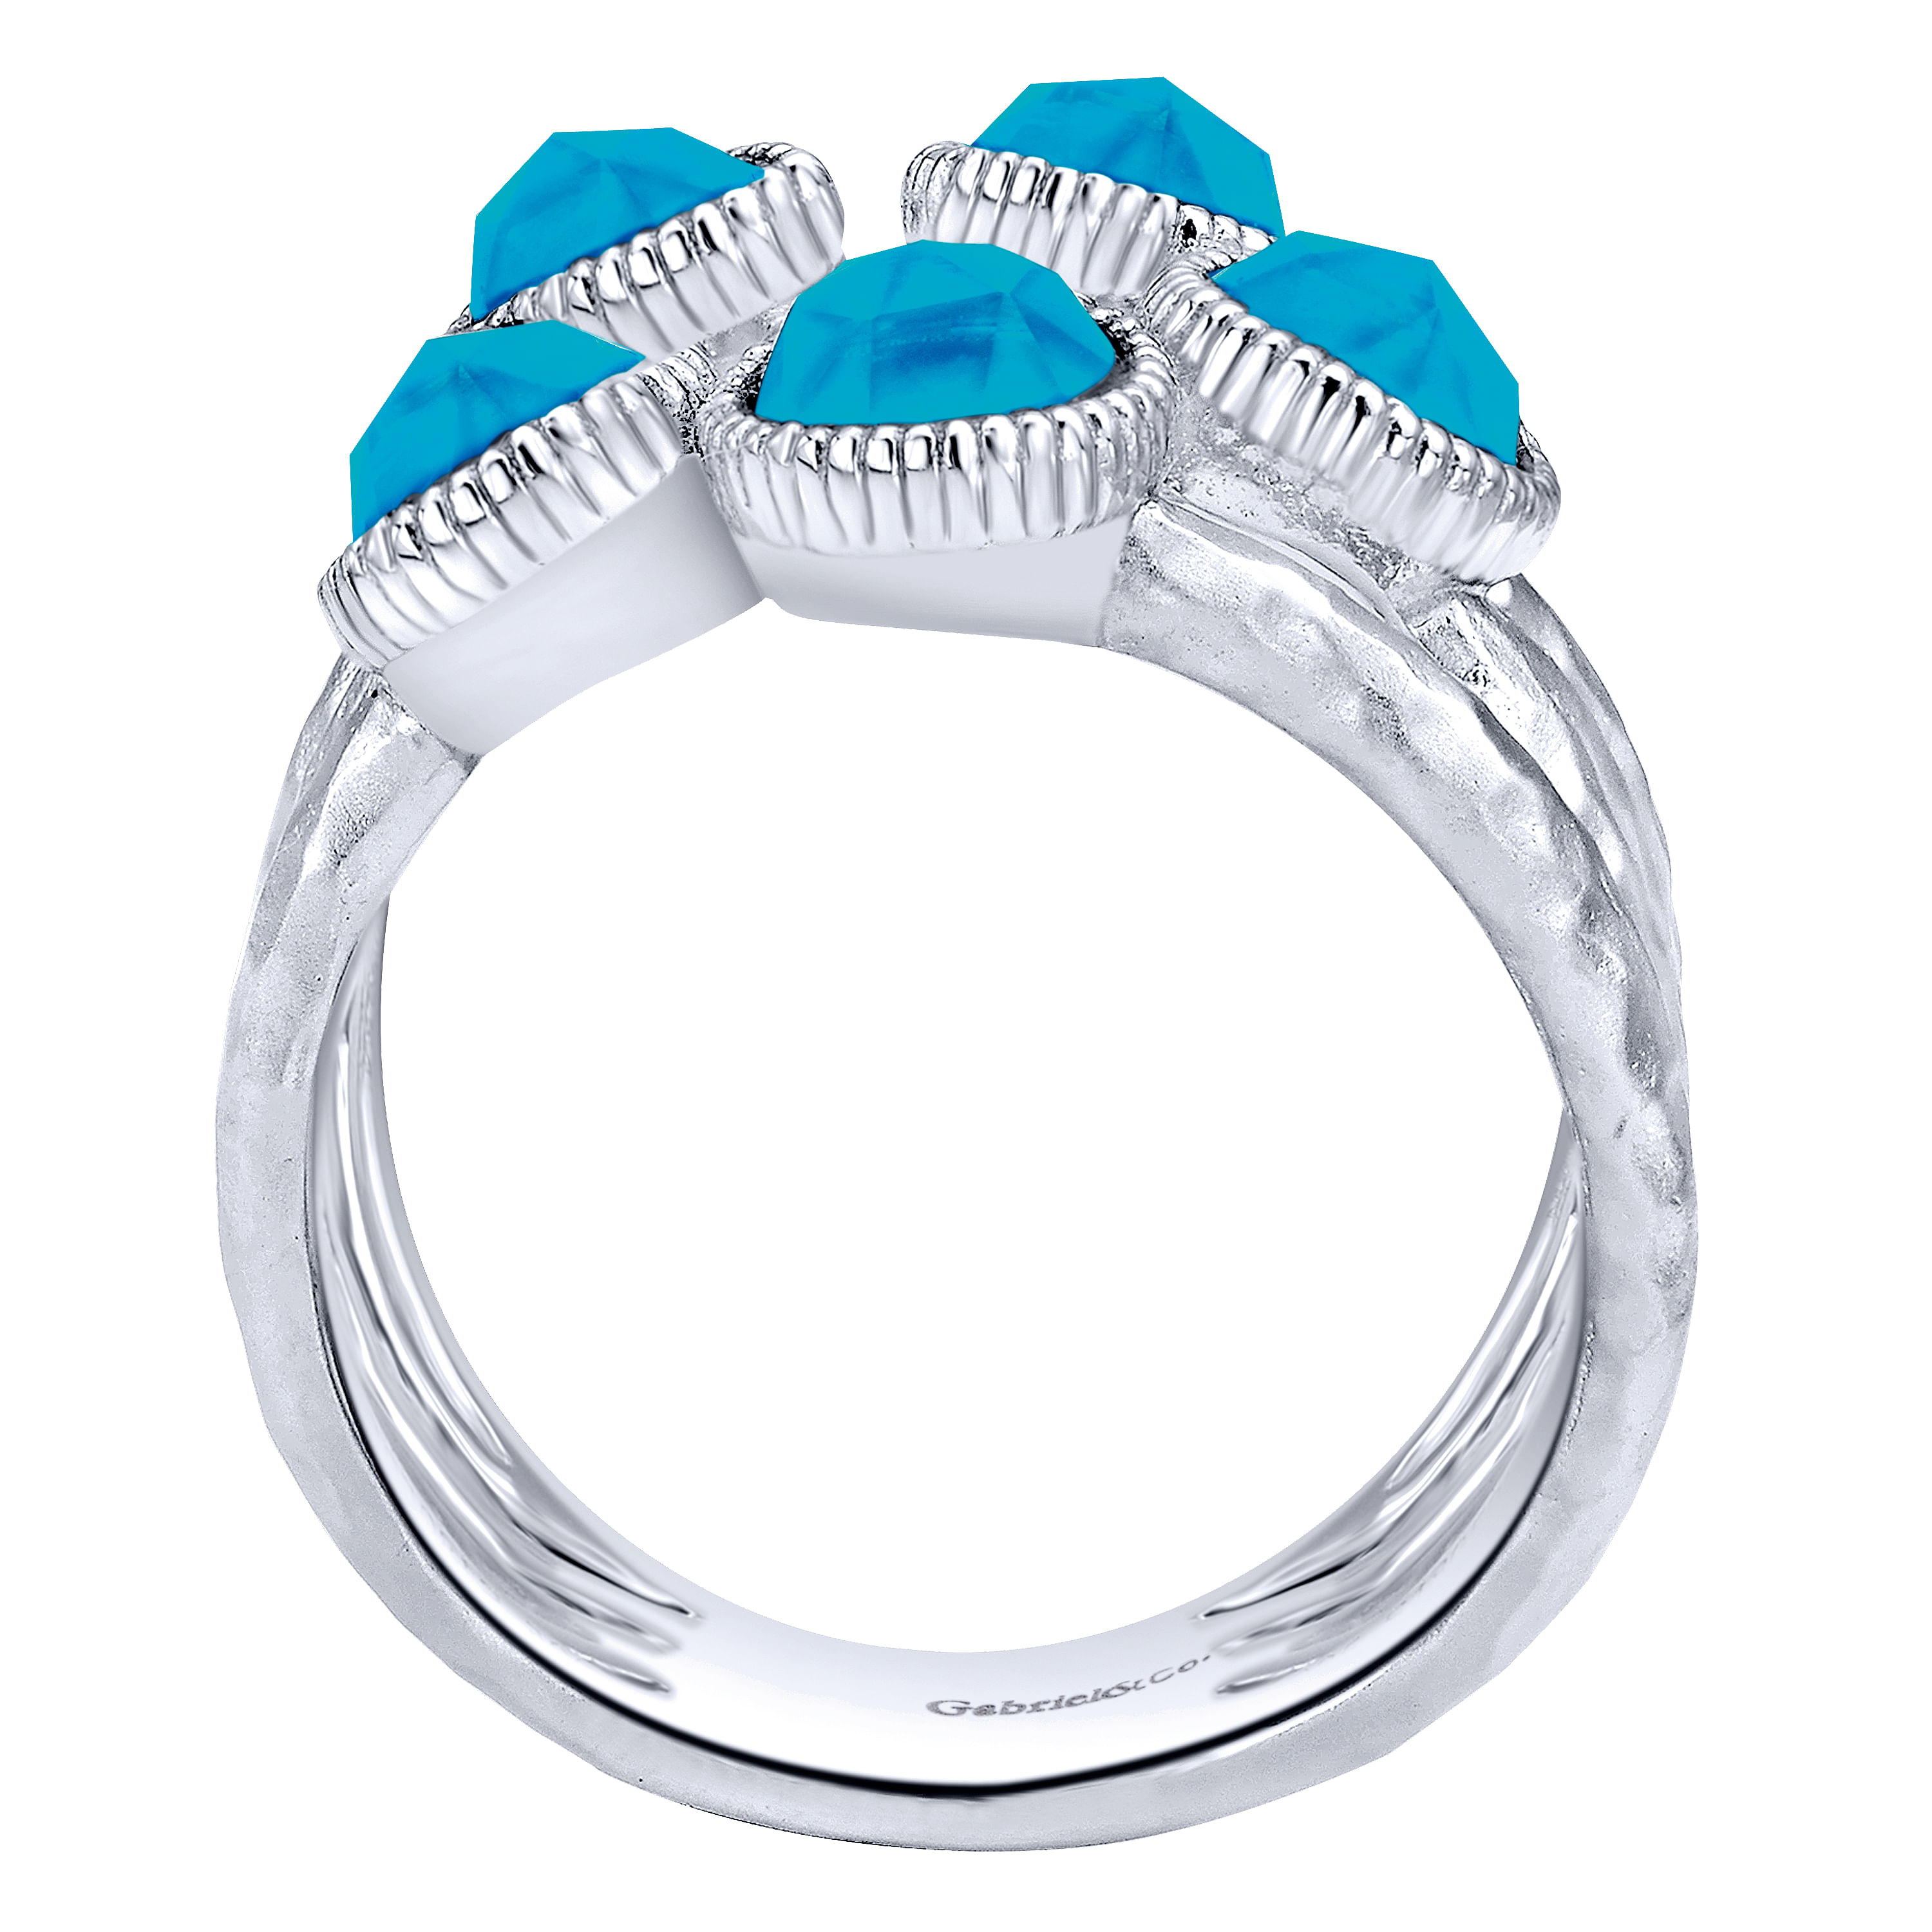 925 Sterling Silver Hammered Rock Crystal/Turquoise and White Sapphire Ring